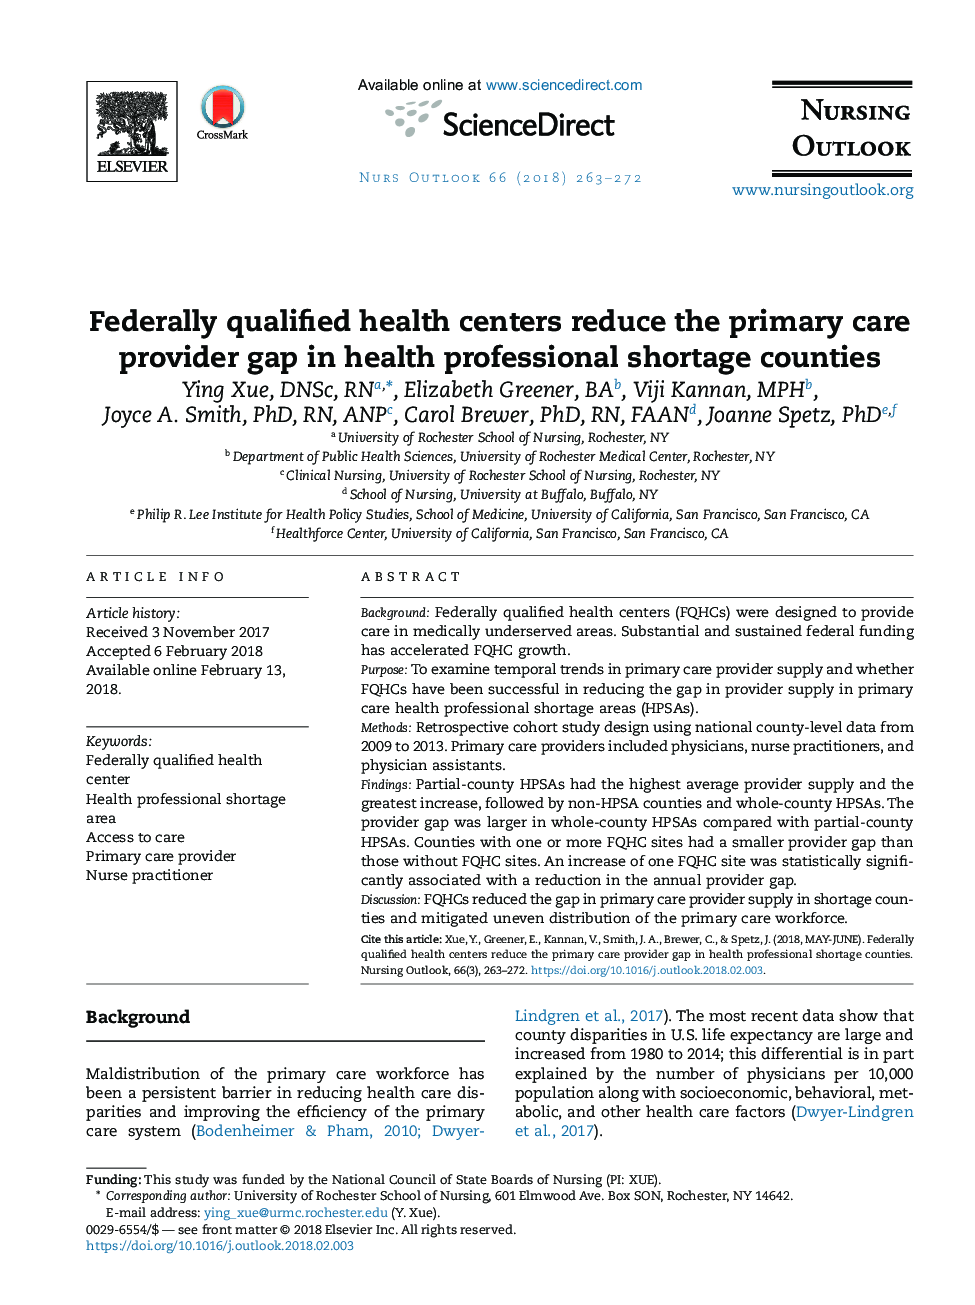 Federally qualified health centers reduce the primary care provider gap in health professional shortage counties